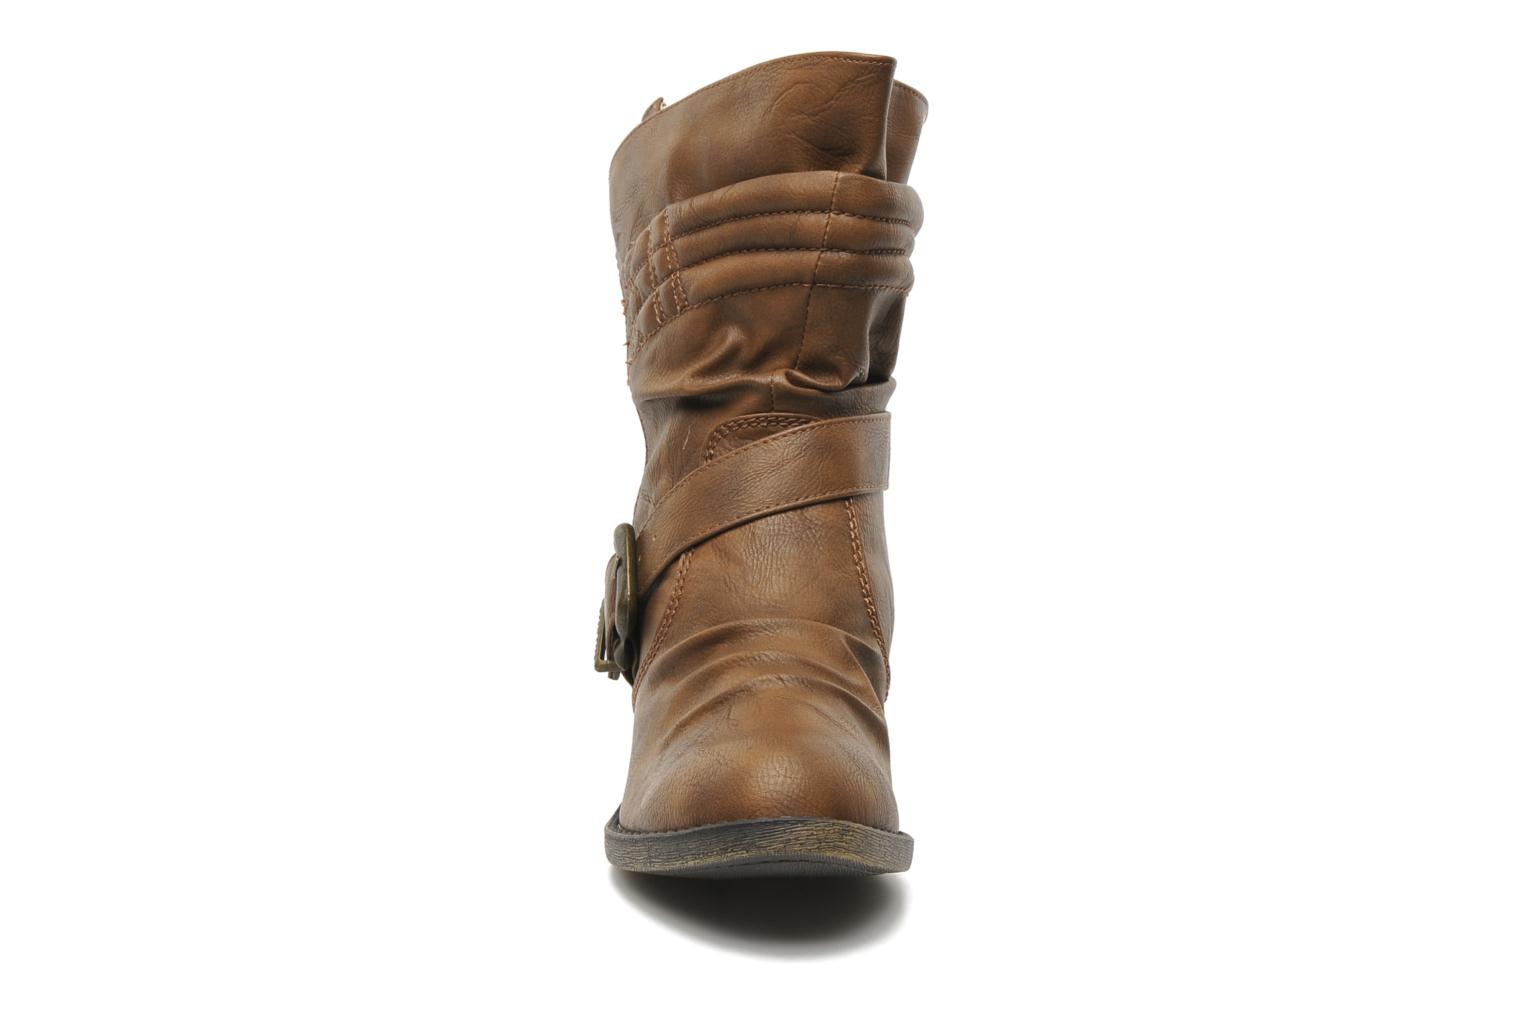 Blowfish Alexandria Ankle boots in Brown at Sarenza.co.uk (180246)